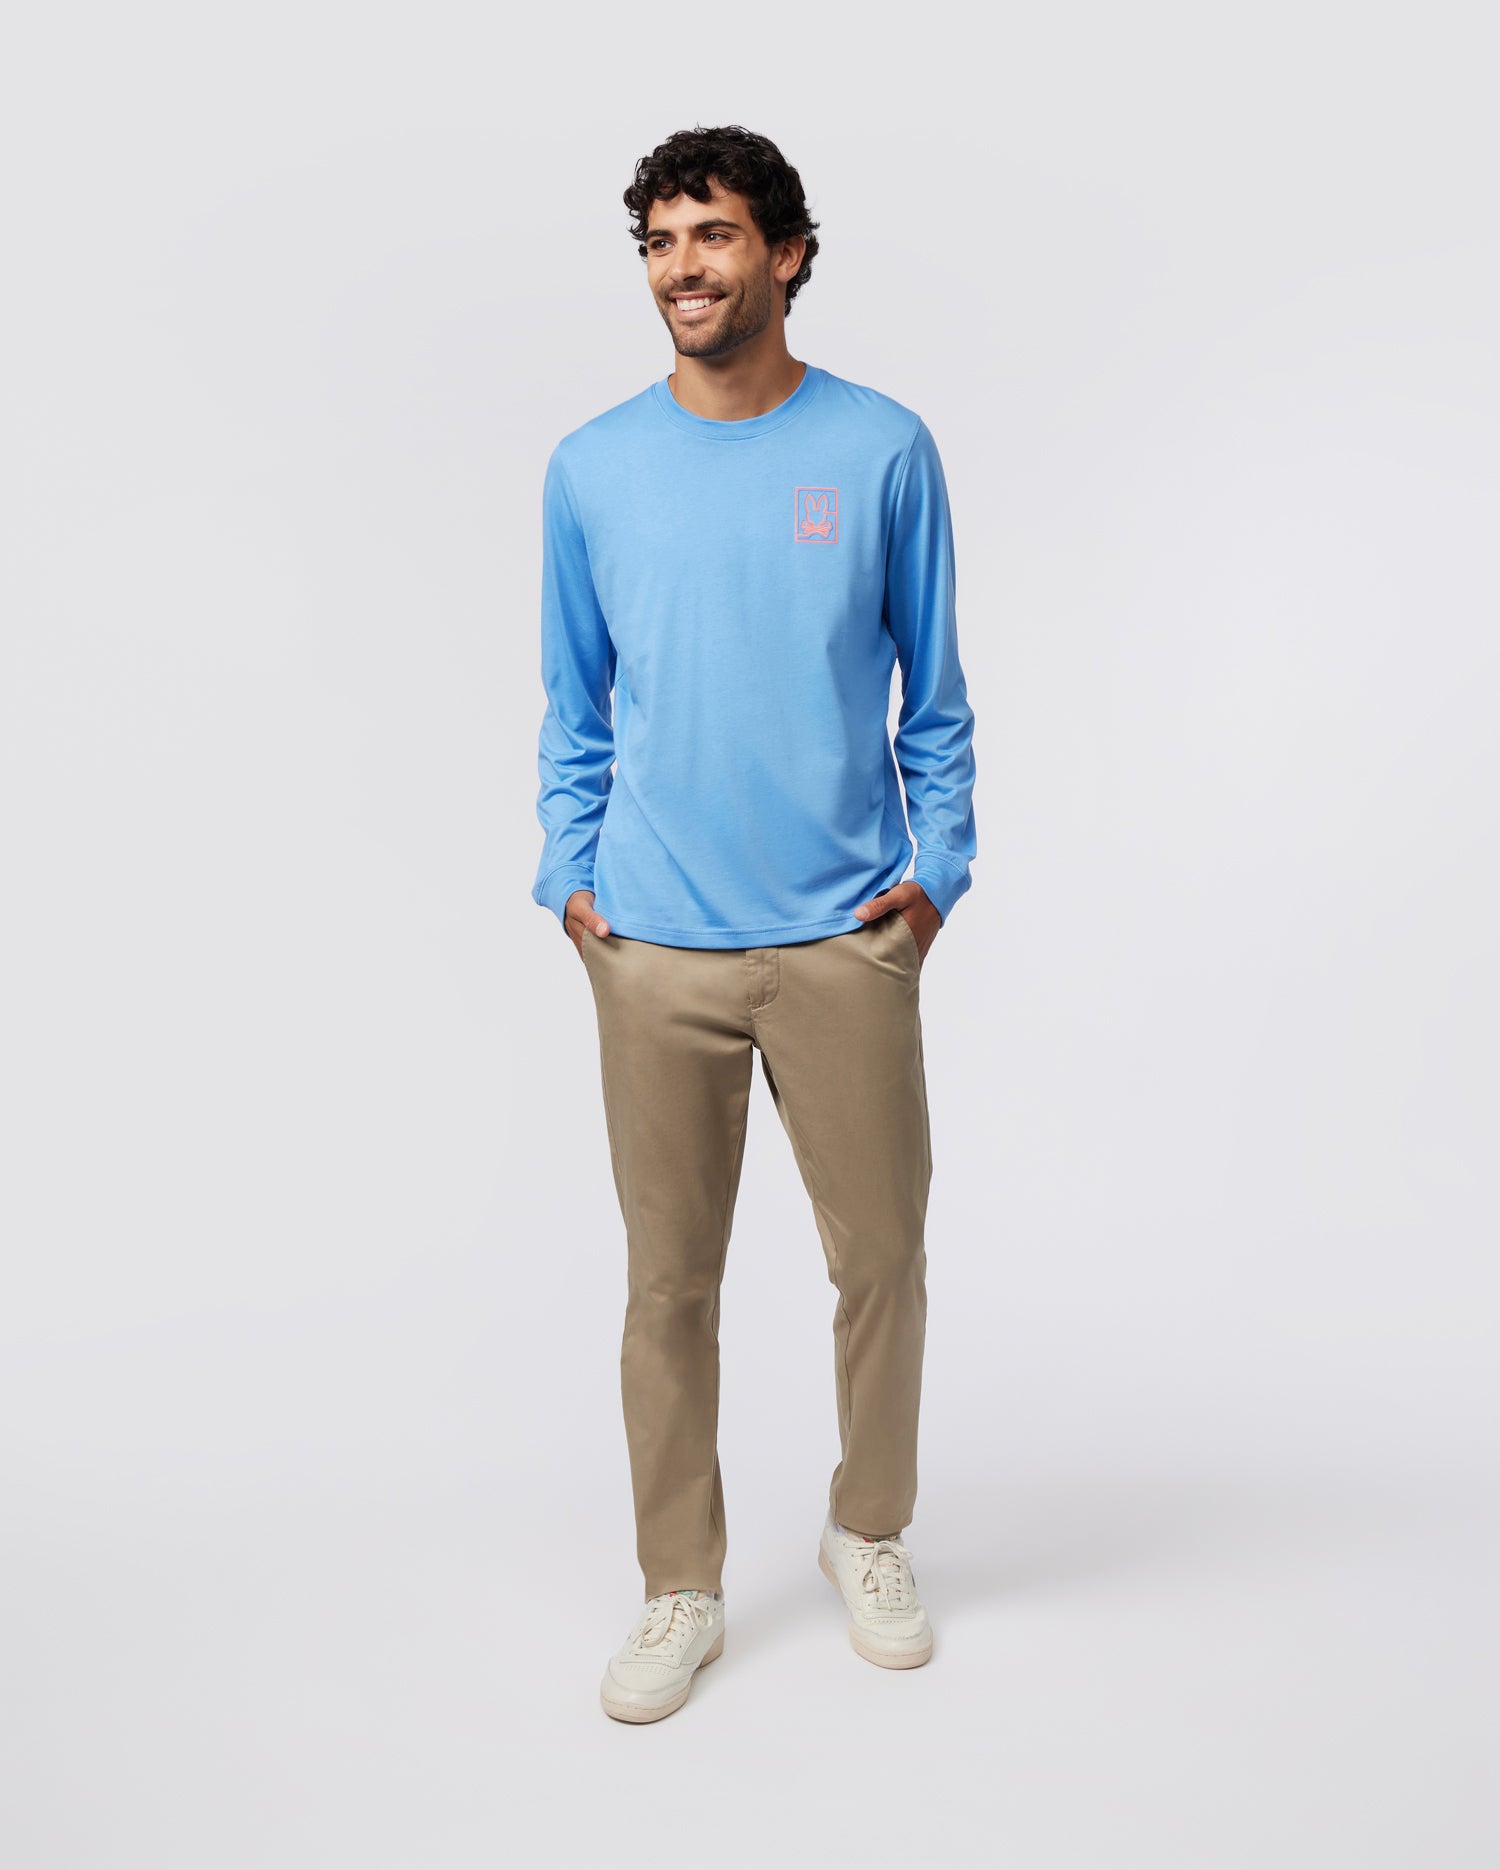 MENS LIGHT BLUE CHESTER LONG SLEEVE GRAPHIC TEE | PSYCHO BUNNY – Psycho ...